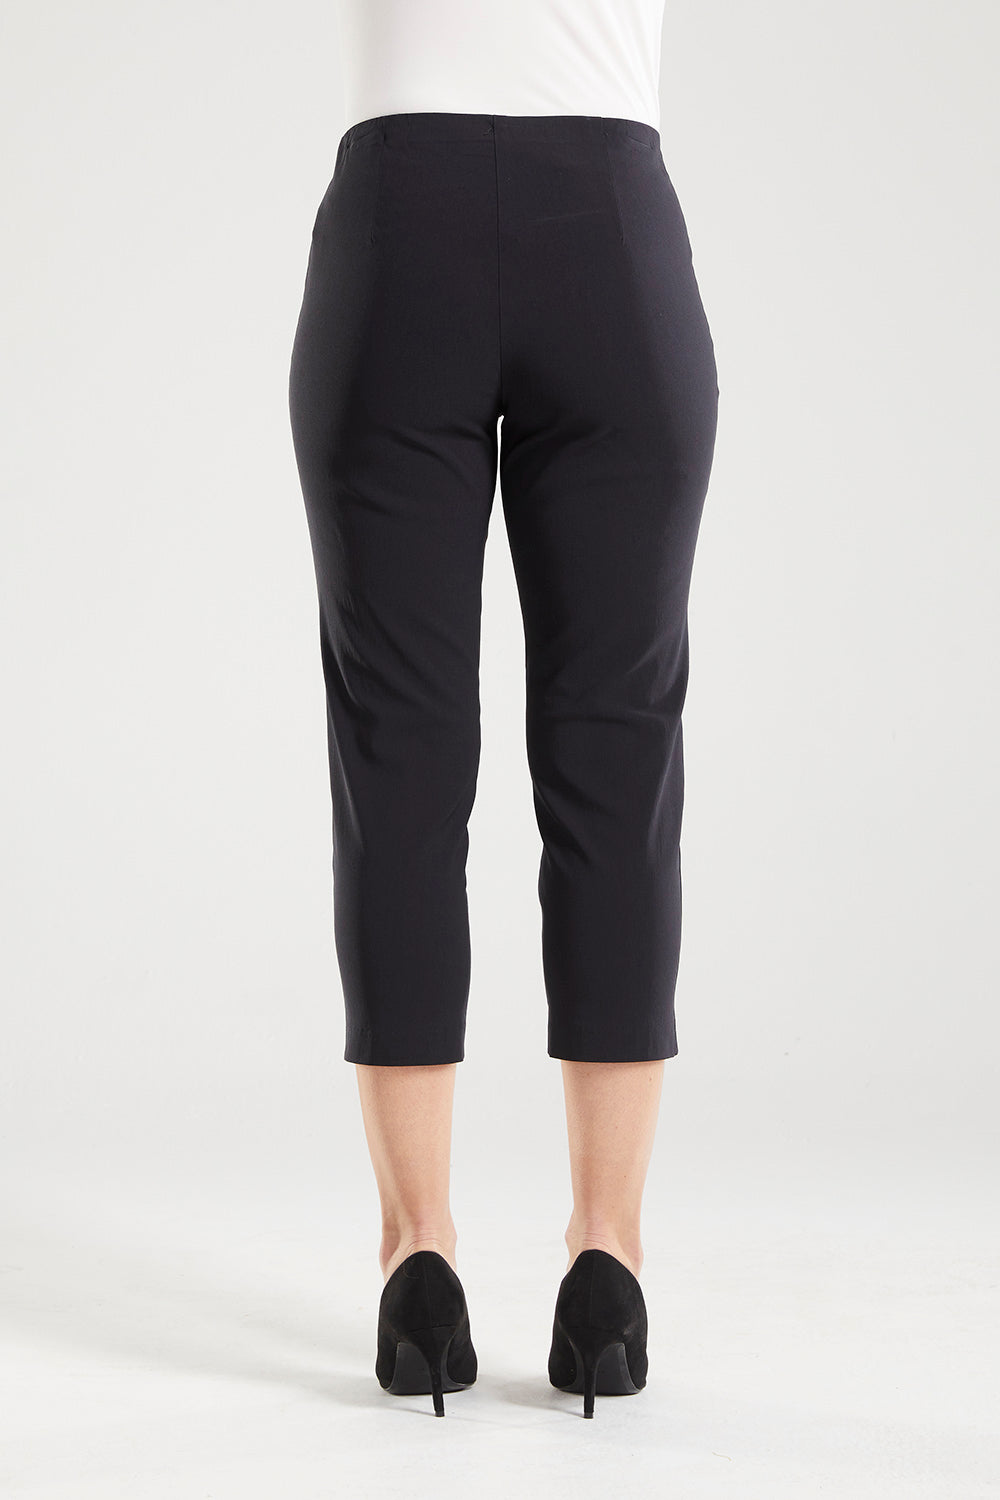 Adora is a Spring Summer 3/4 cropped black pant. Cut at calf length, with an easy comfortable pull on elastic waist and slim legs. Image is back view of model. Philosophy Australia bengaline 3/4 length pant.